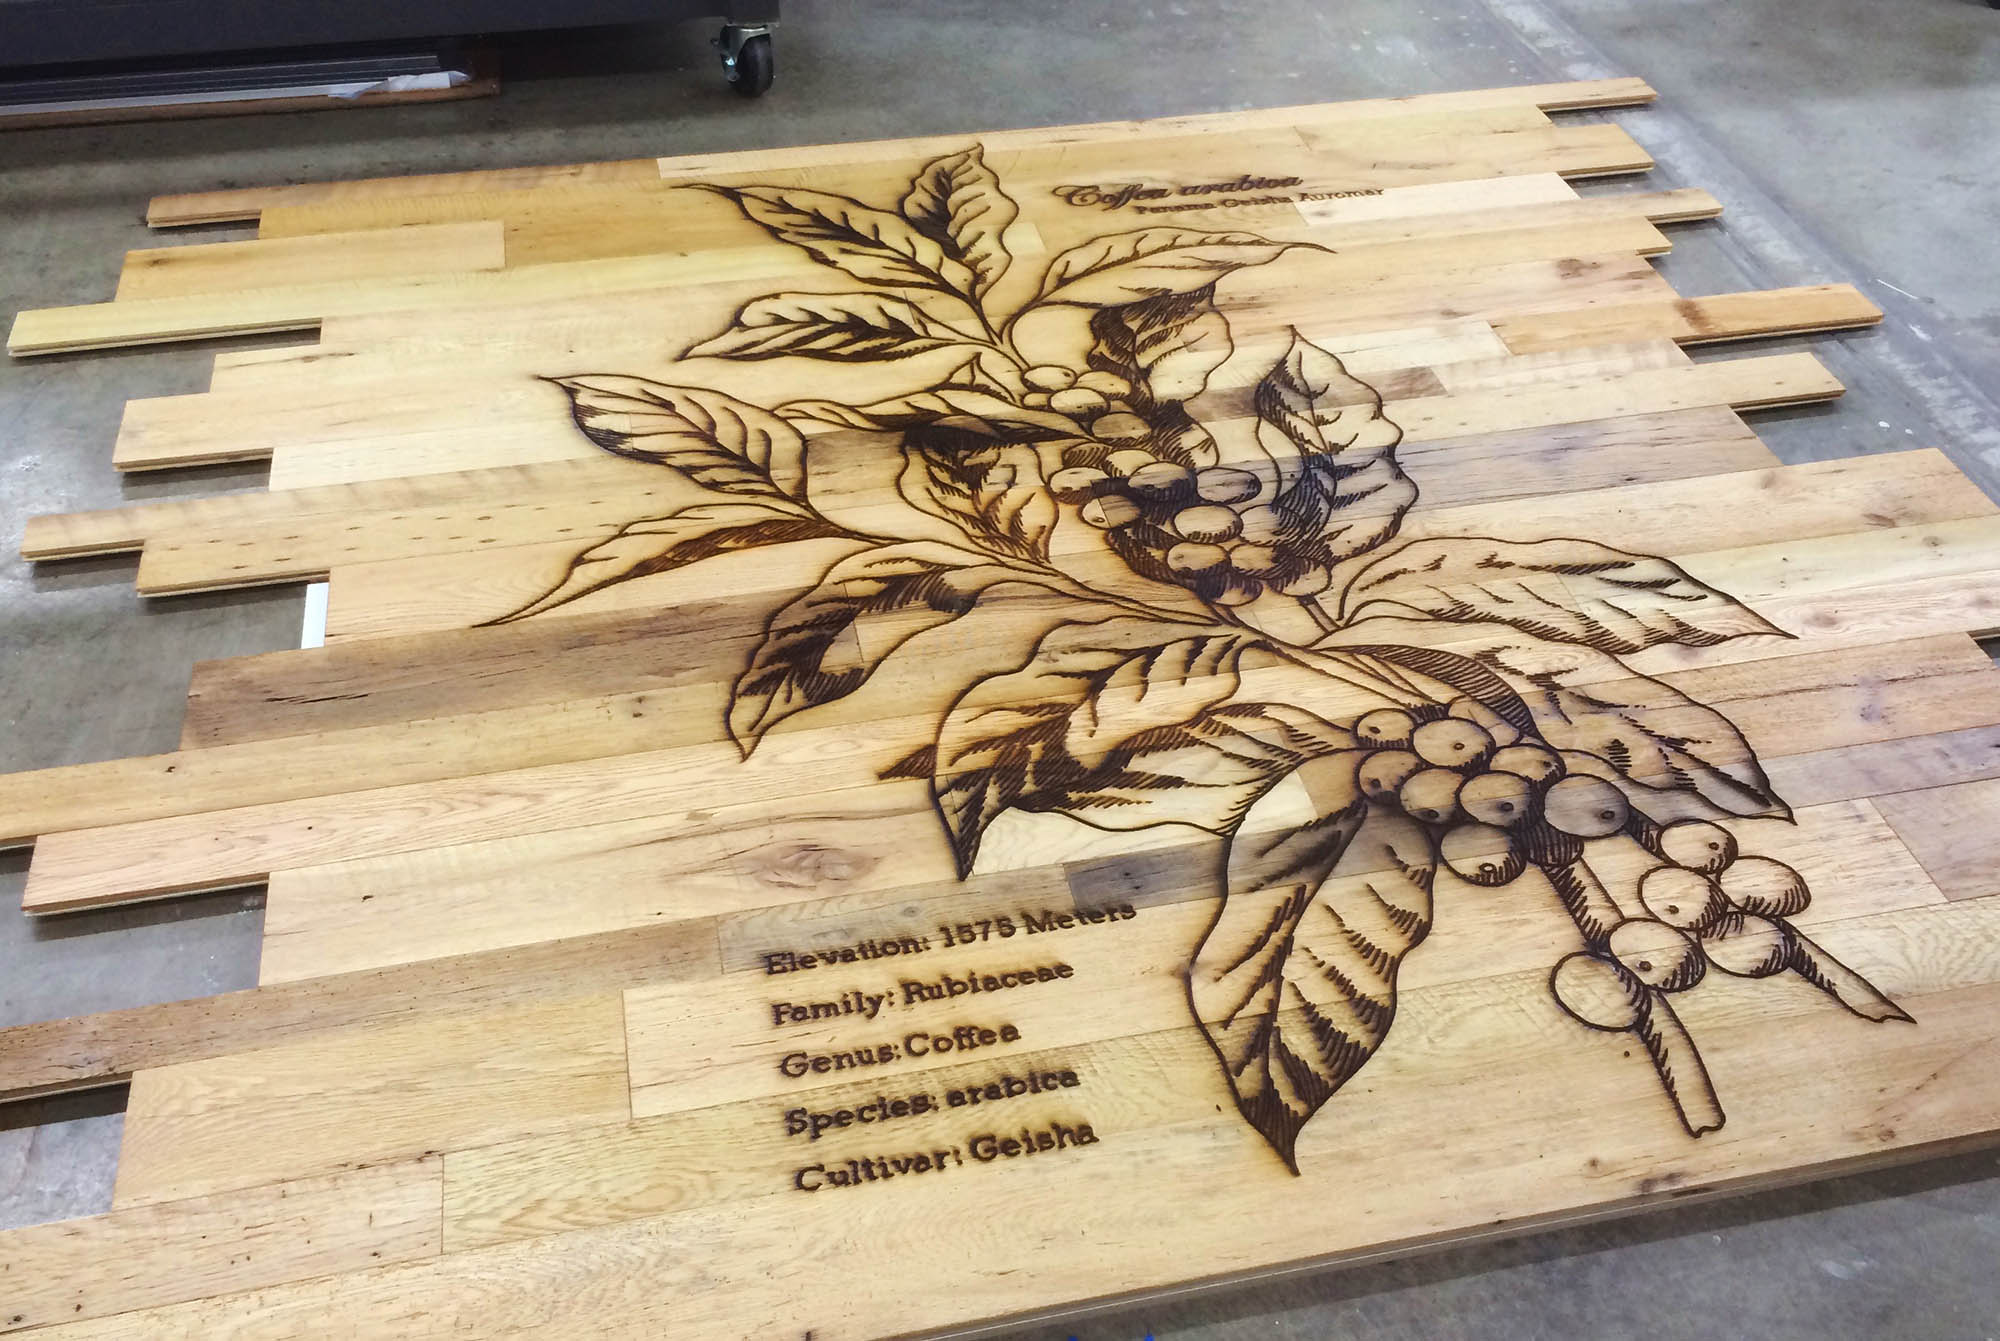 Solid Wood Panels for laser engraving and laser cutting